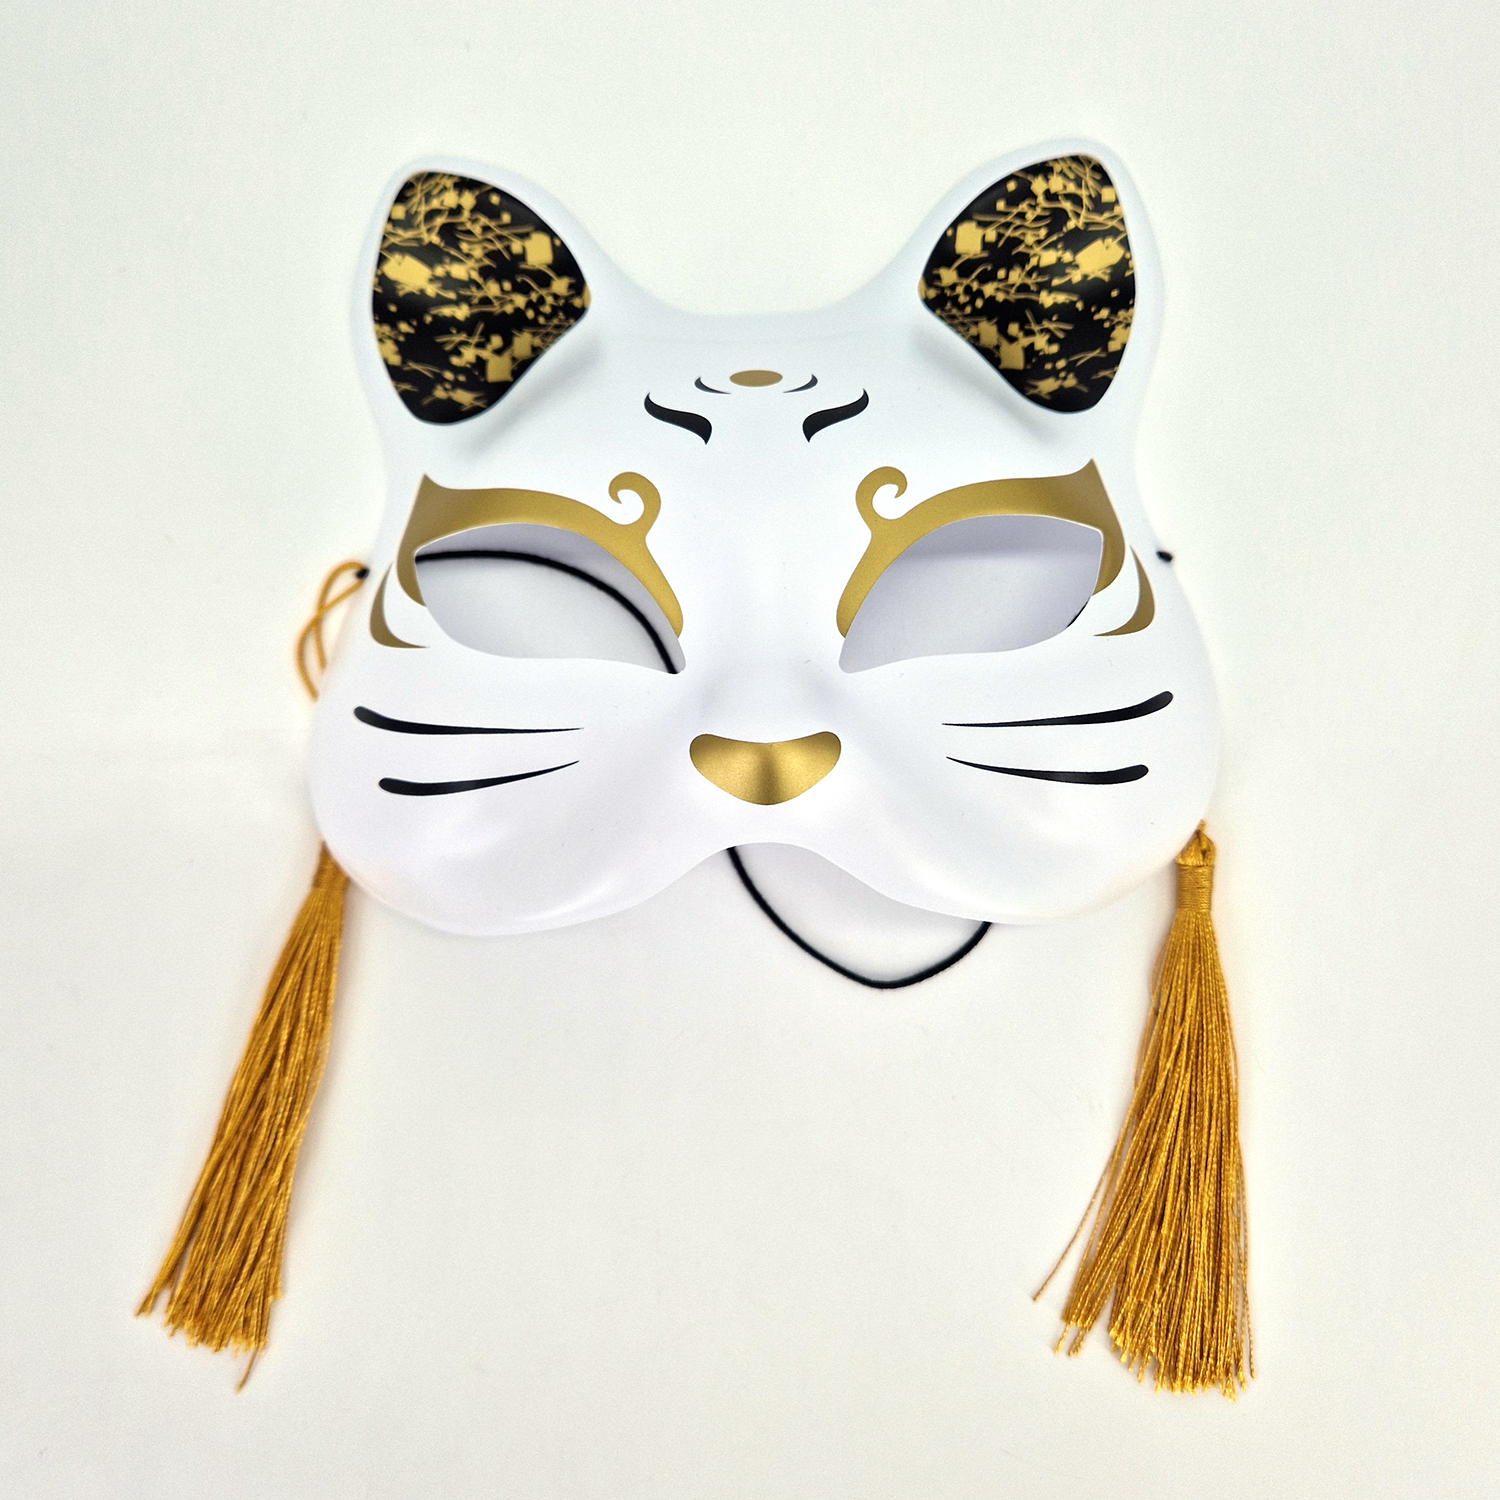 Japanese red and white cat mask